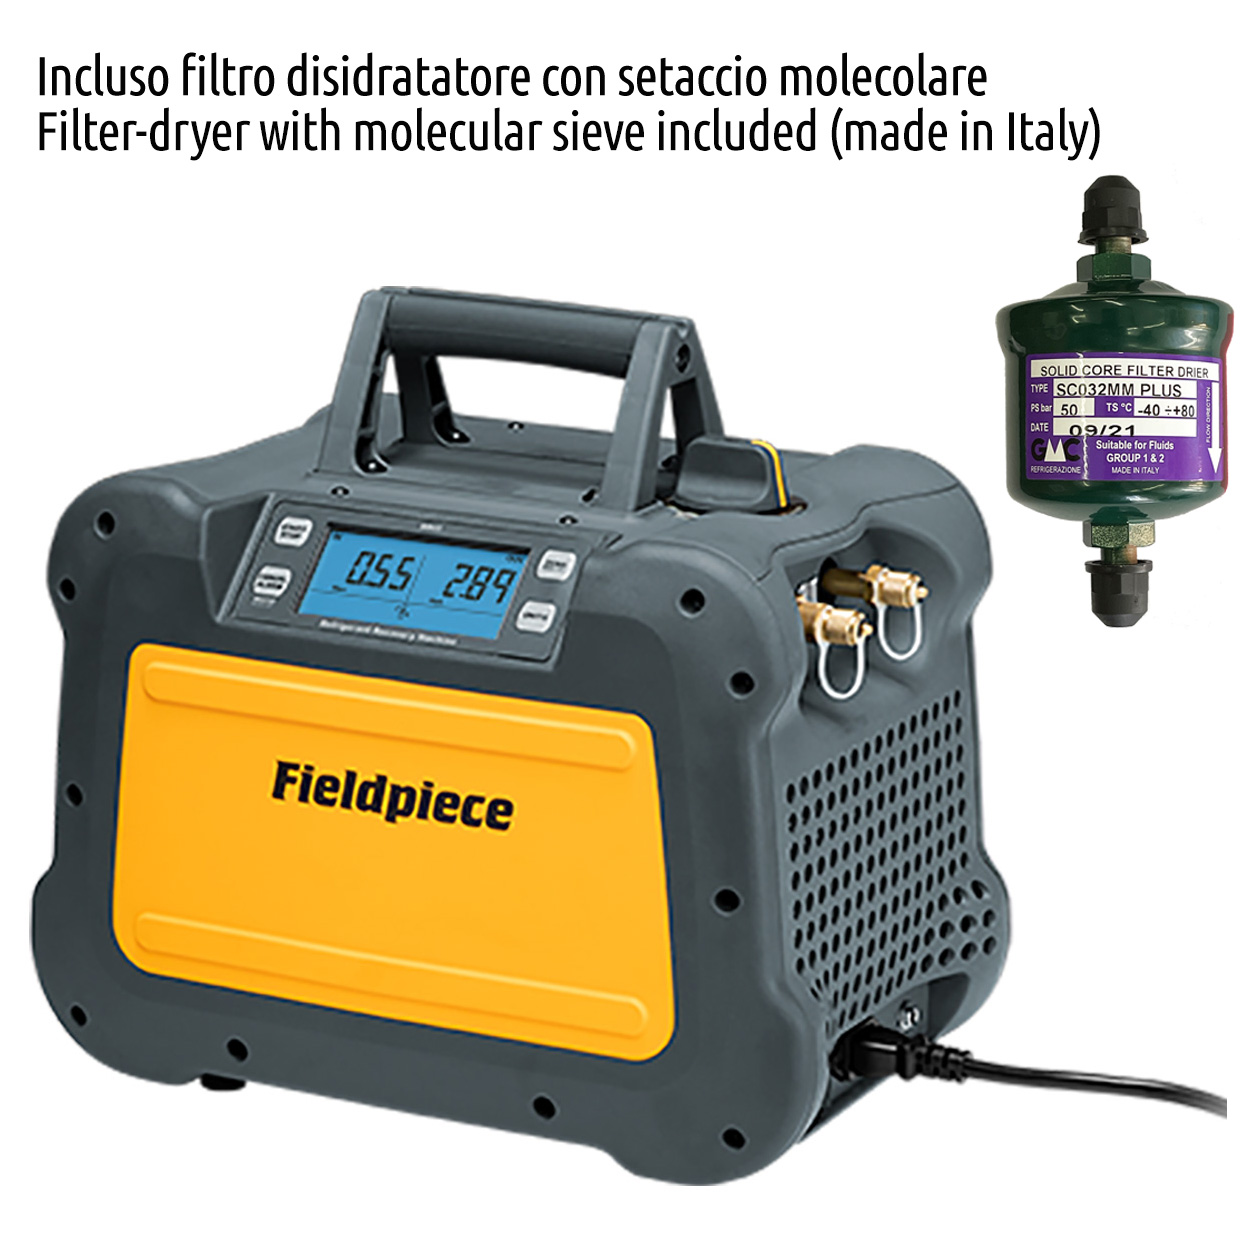 Fieldpiece USA - MR45INT Digital Recovery Machine 1 HP - 0,75 Kw with filter-dryer and adapter